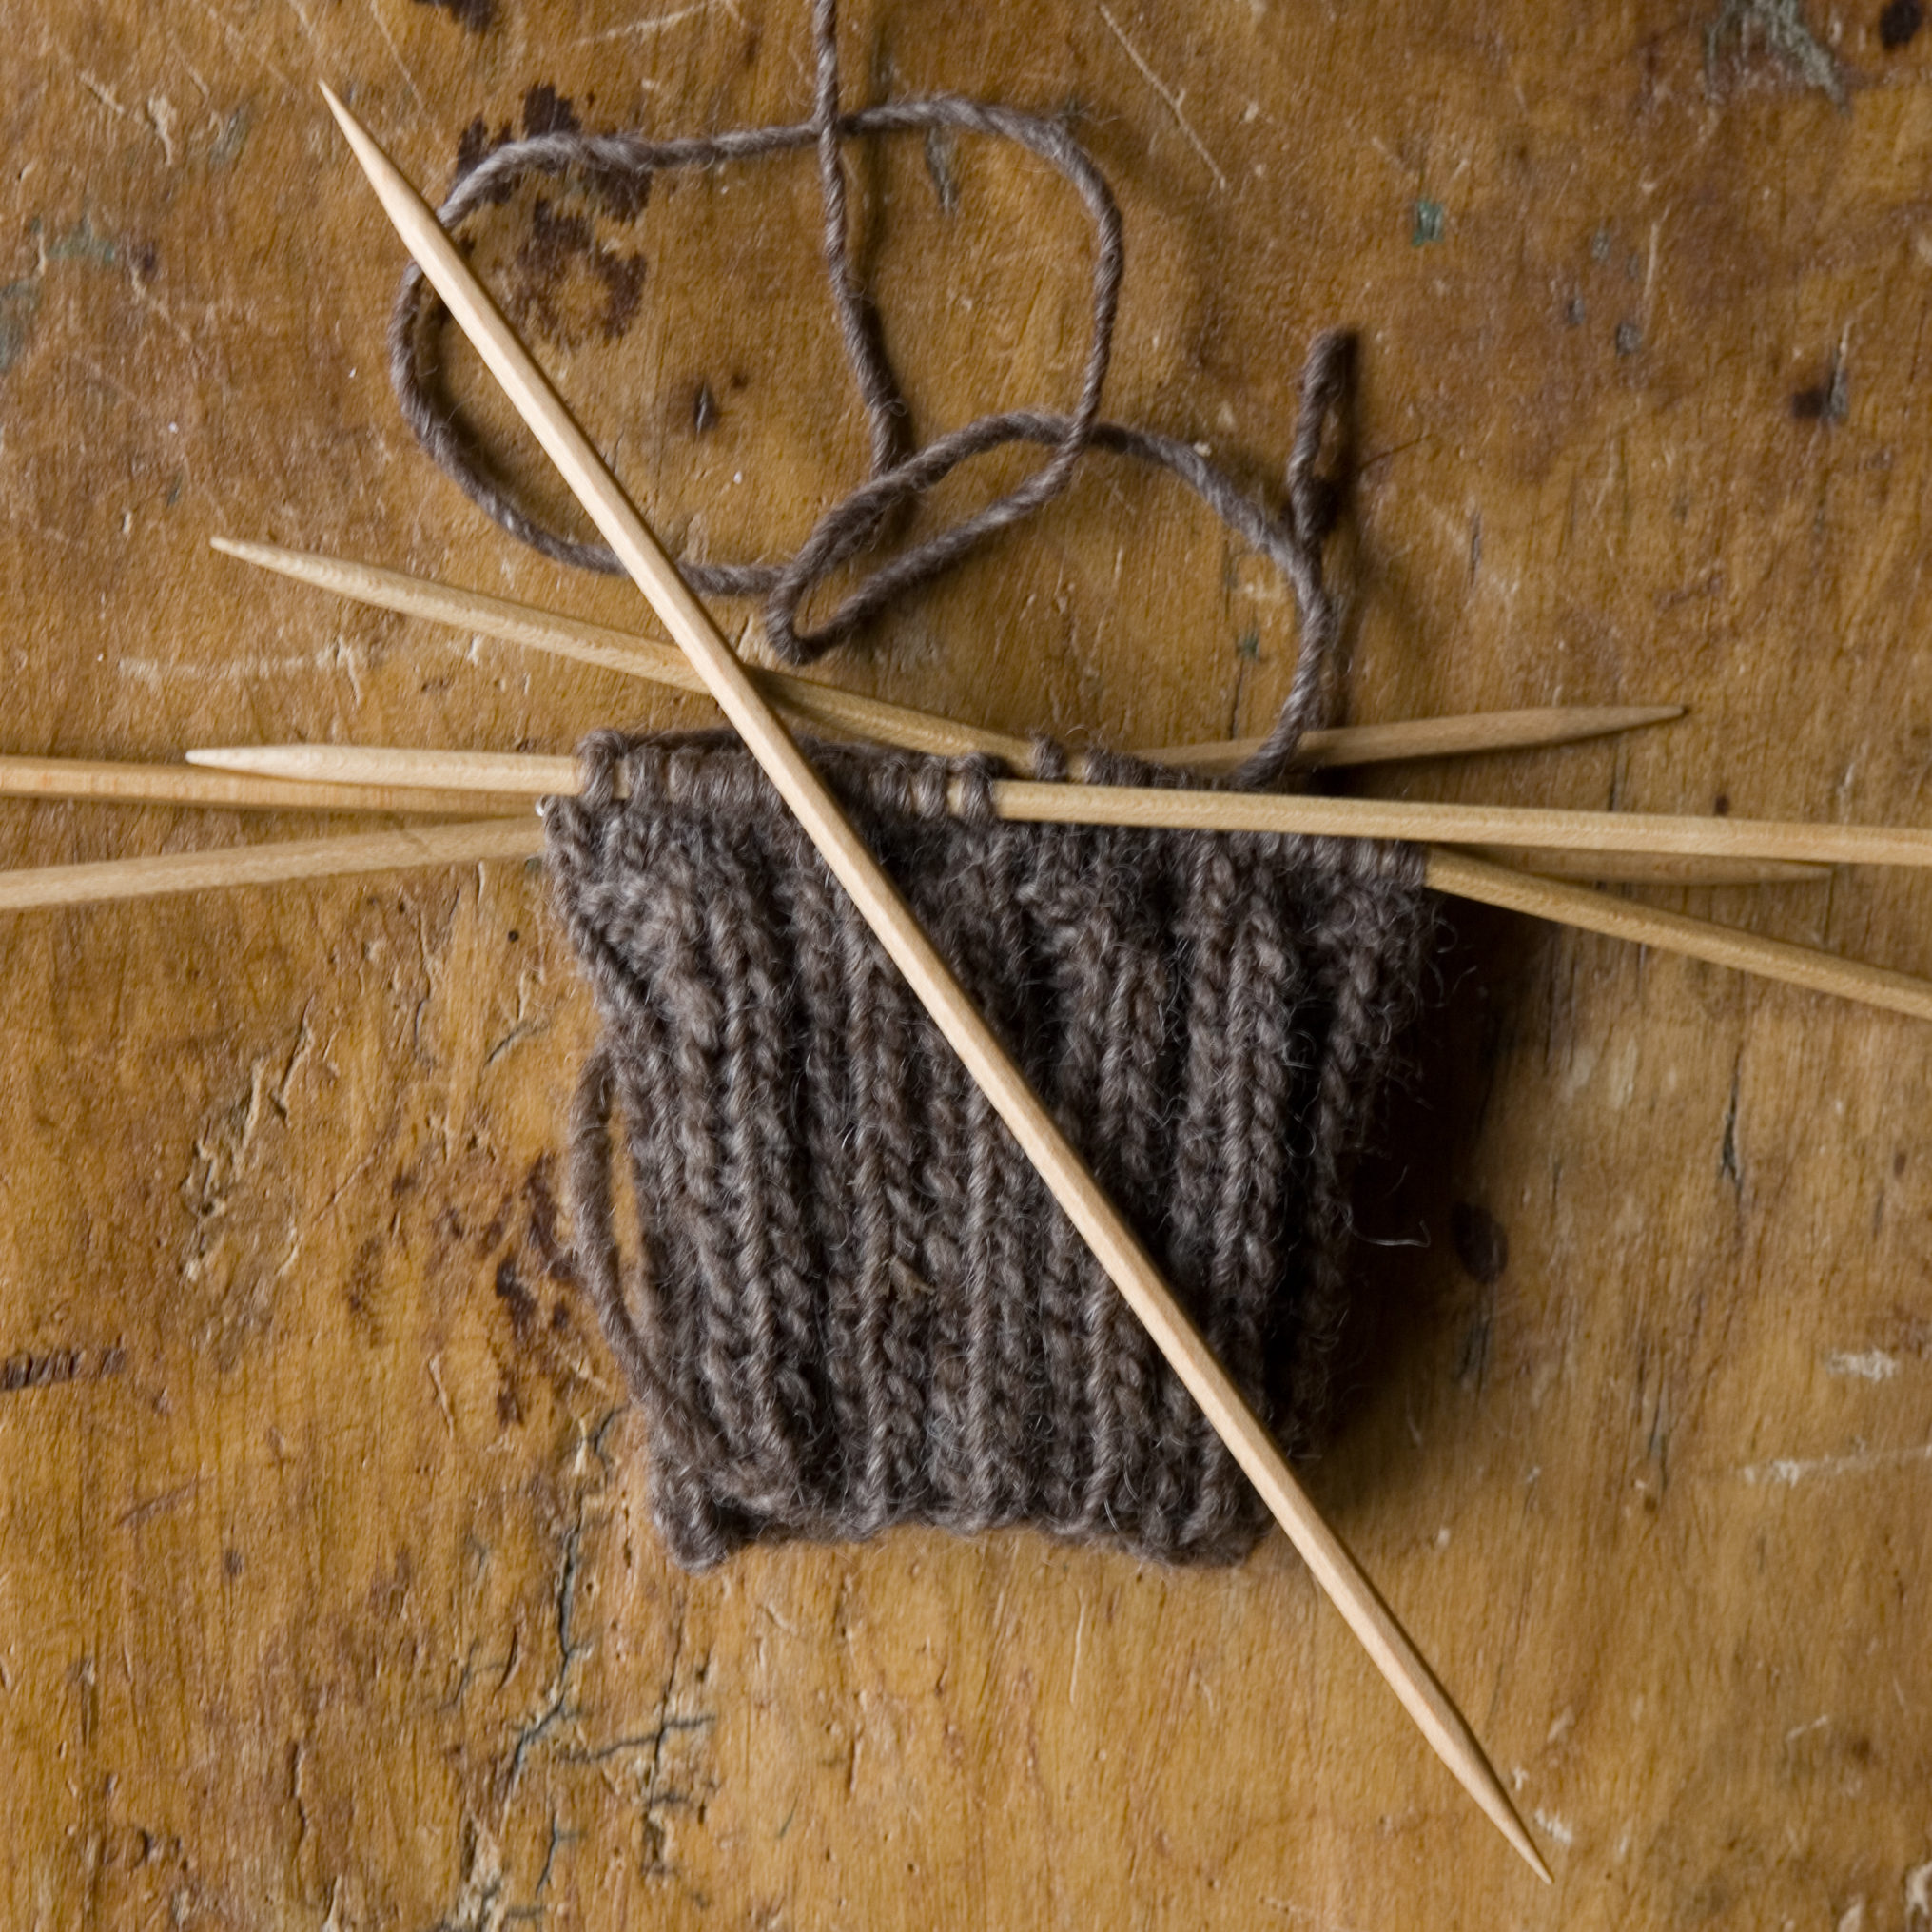 How to Use Double-Pointed Knitting Needles